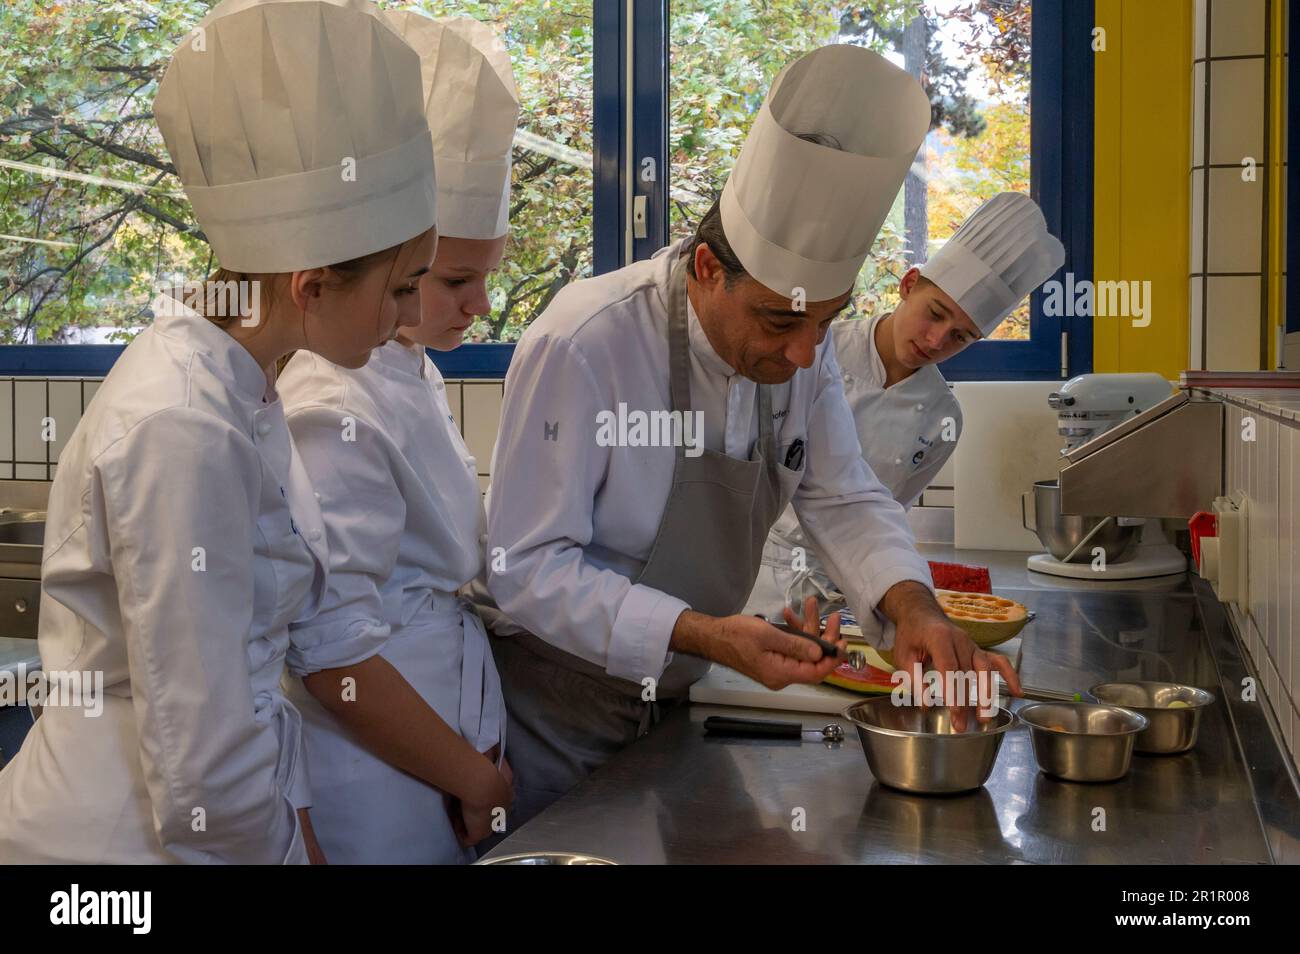 Italy, Trentino-Alto Adige, Alto Adige - South Tyrol, Eisacktel, Bressanone, Provincial Vocational School for the Hospitality and Food Industry, Emma Hellenstainer, Armin Mairhofer, Pearls of marinated melons, cucumbers, oyster cabbage Stock Photo